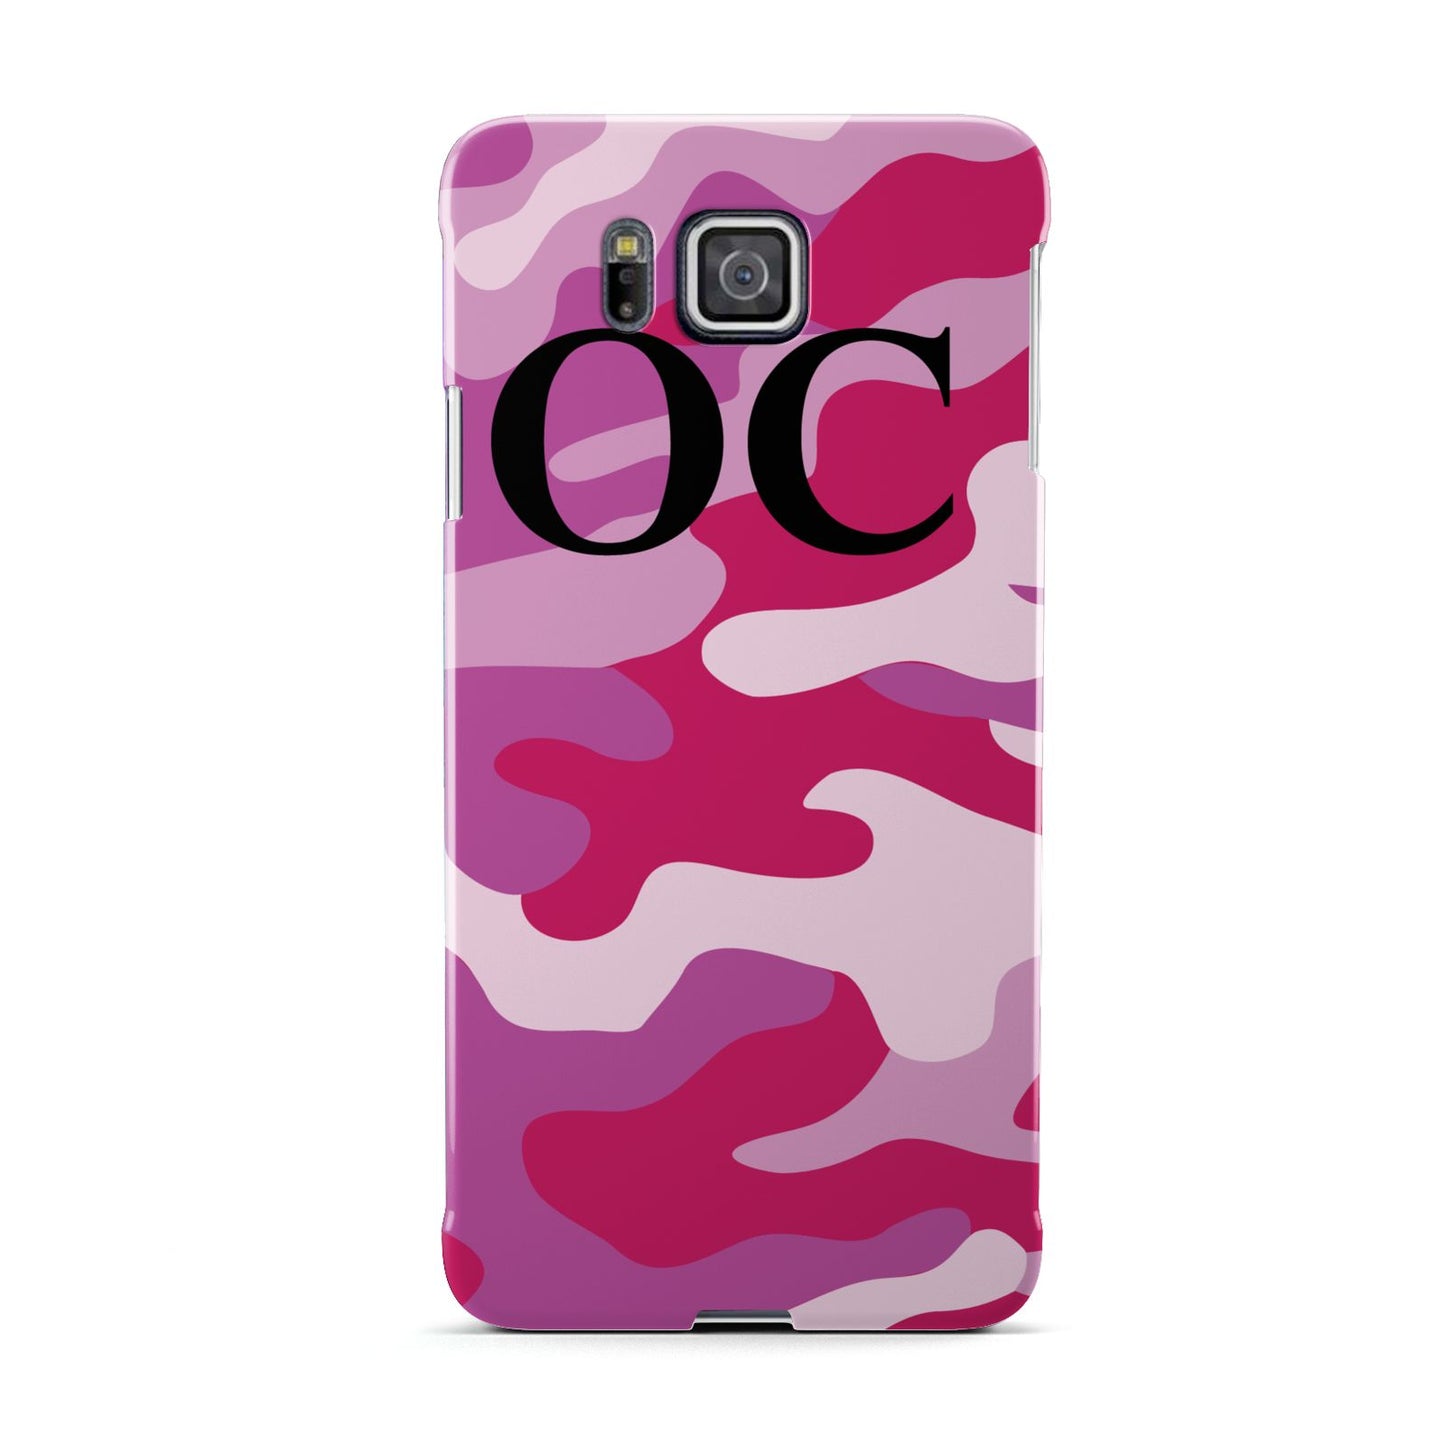 Camouflage Personalised Samsung Galaxy Alpha Case